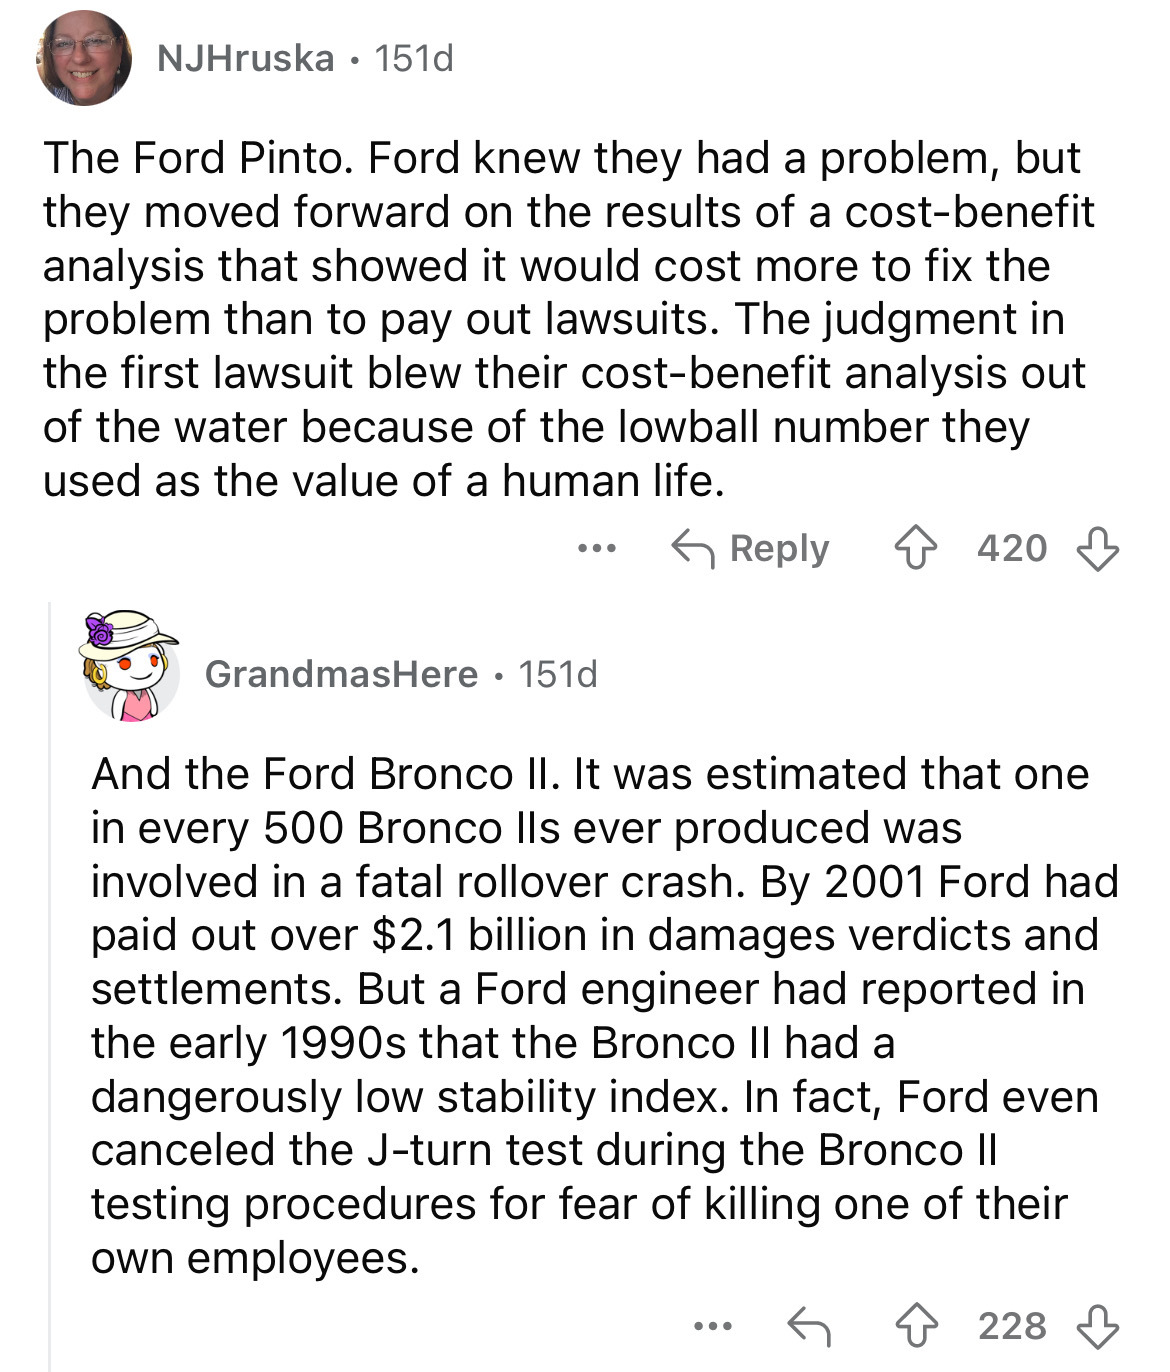 document - NJHruska 151d . The Ford Pinto. Ford knew they had a problem, but they moved forward on the results of a costbenefit analysis that showed it would cost more to fix the problem than to pay out lawsuits. The judgment in the first lawsuit blew the